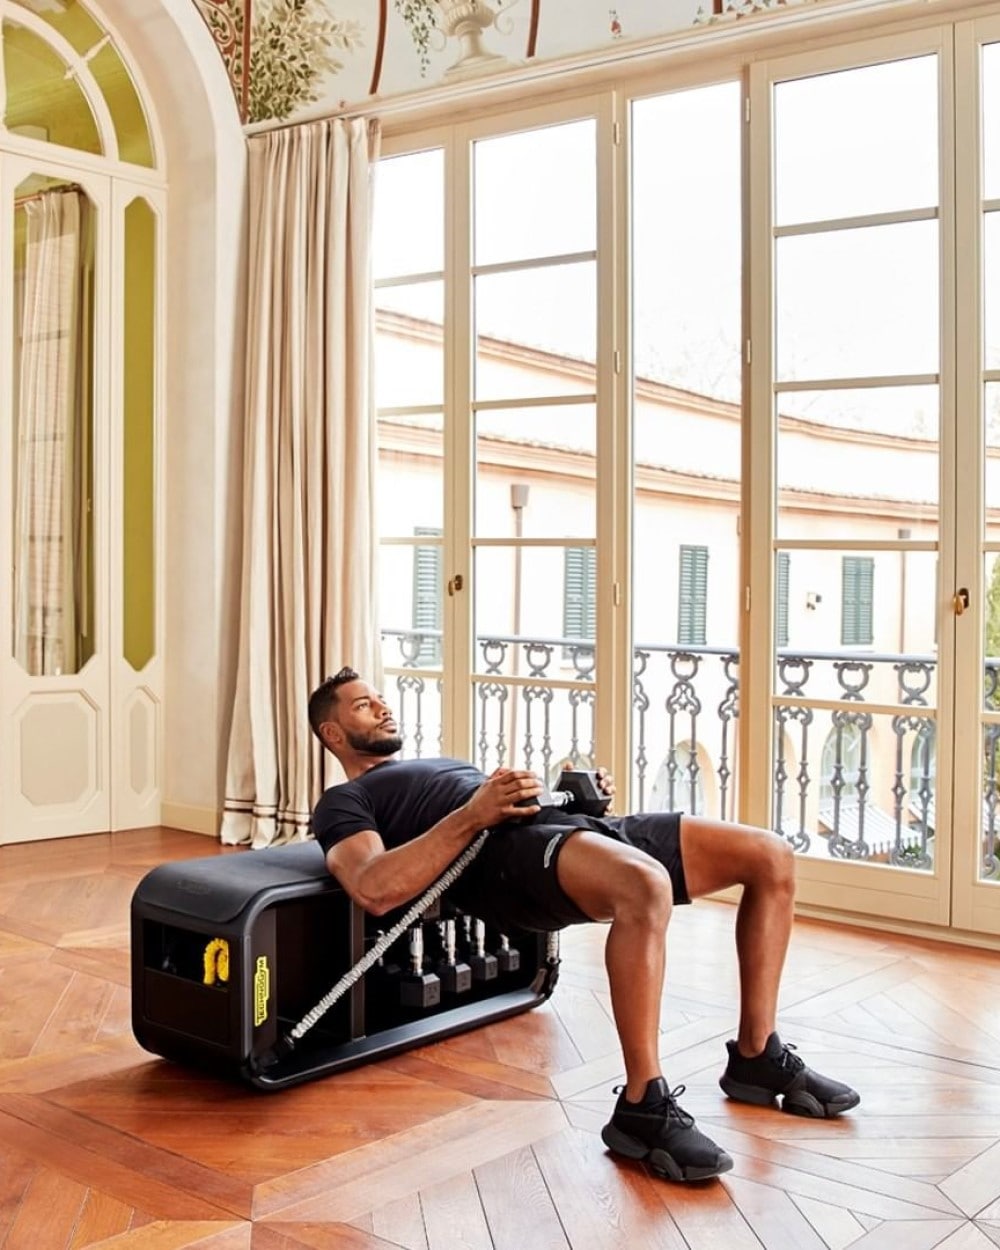 Technogym Bench  The perfect home fitness workout + storage